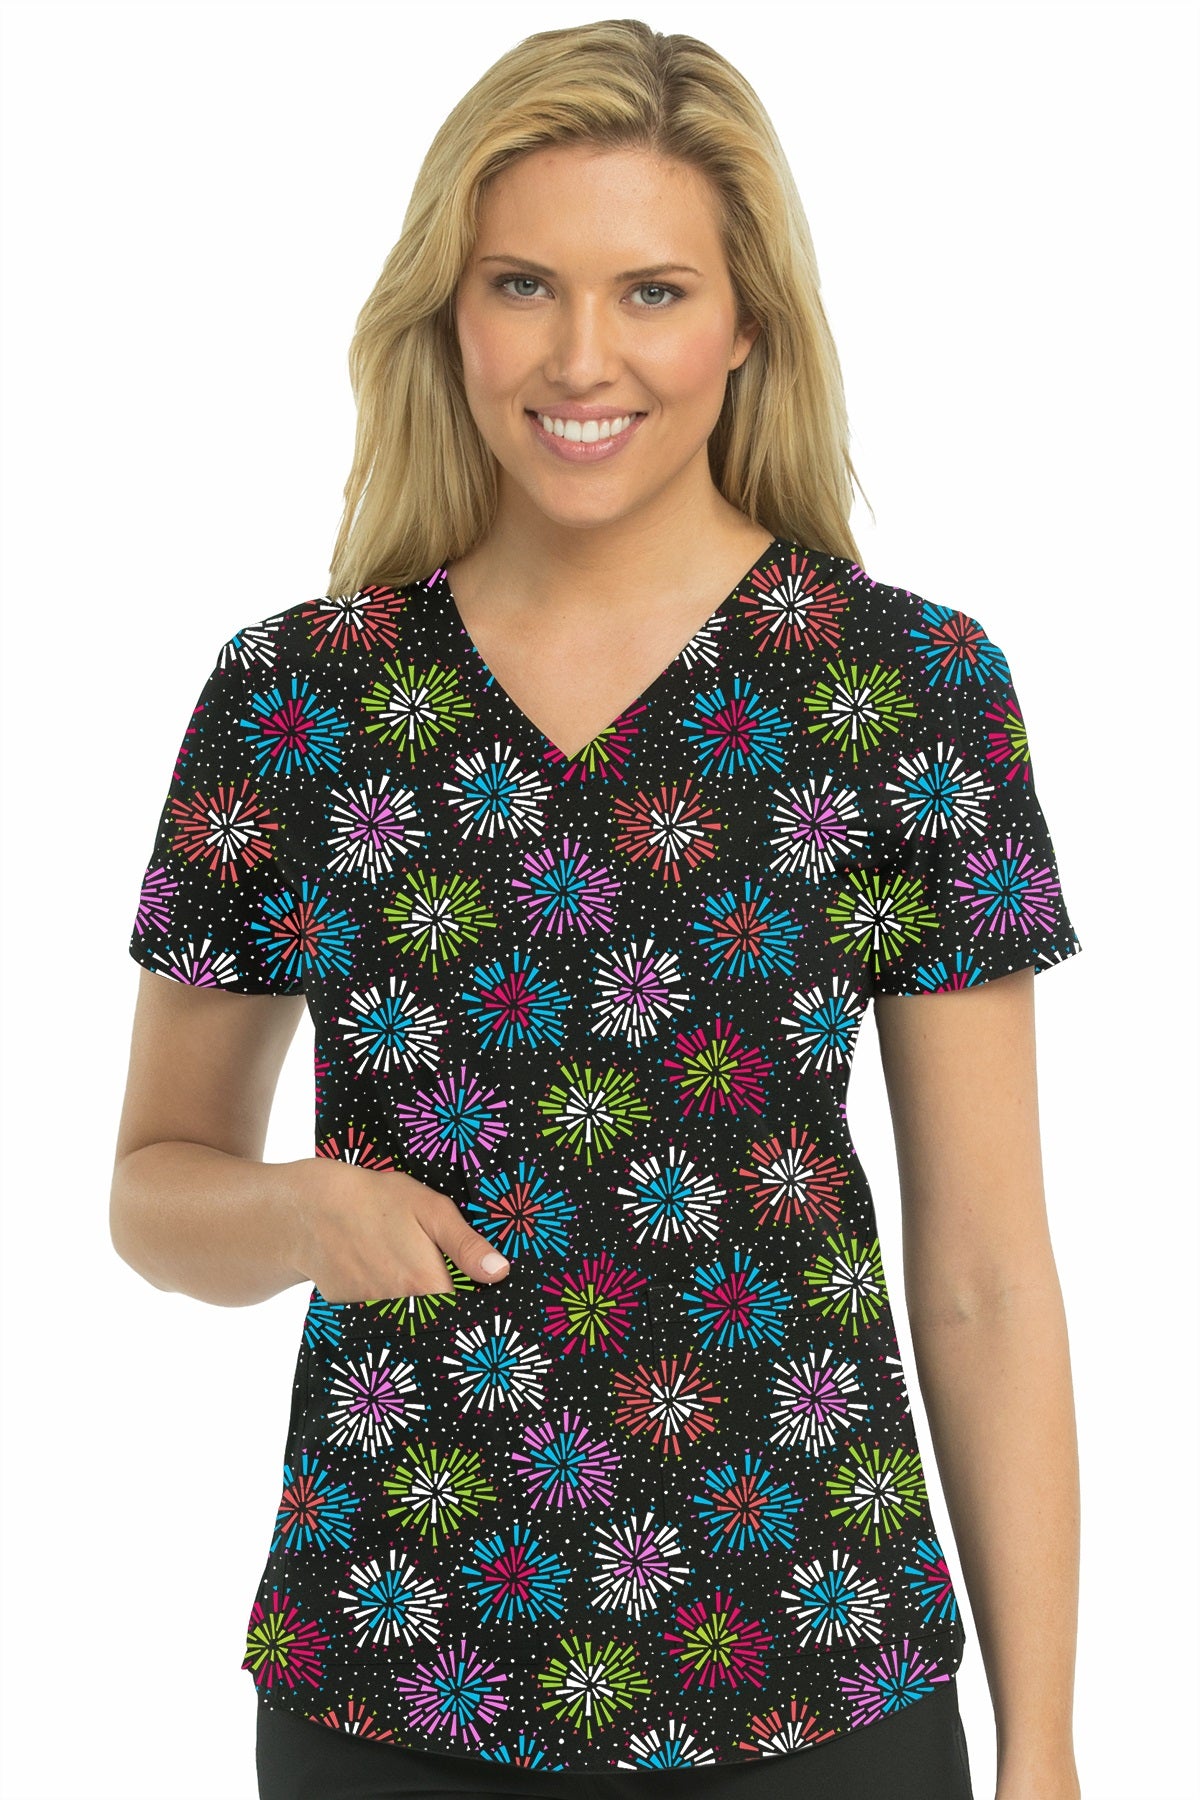 Med Couture Serena V-Neck Print Top in Flower Explosion at Parker's Clothing and Shoes.